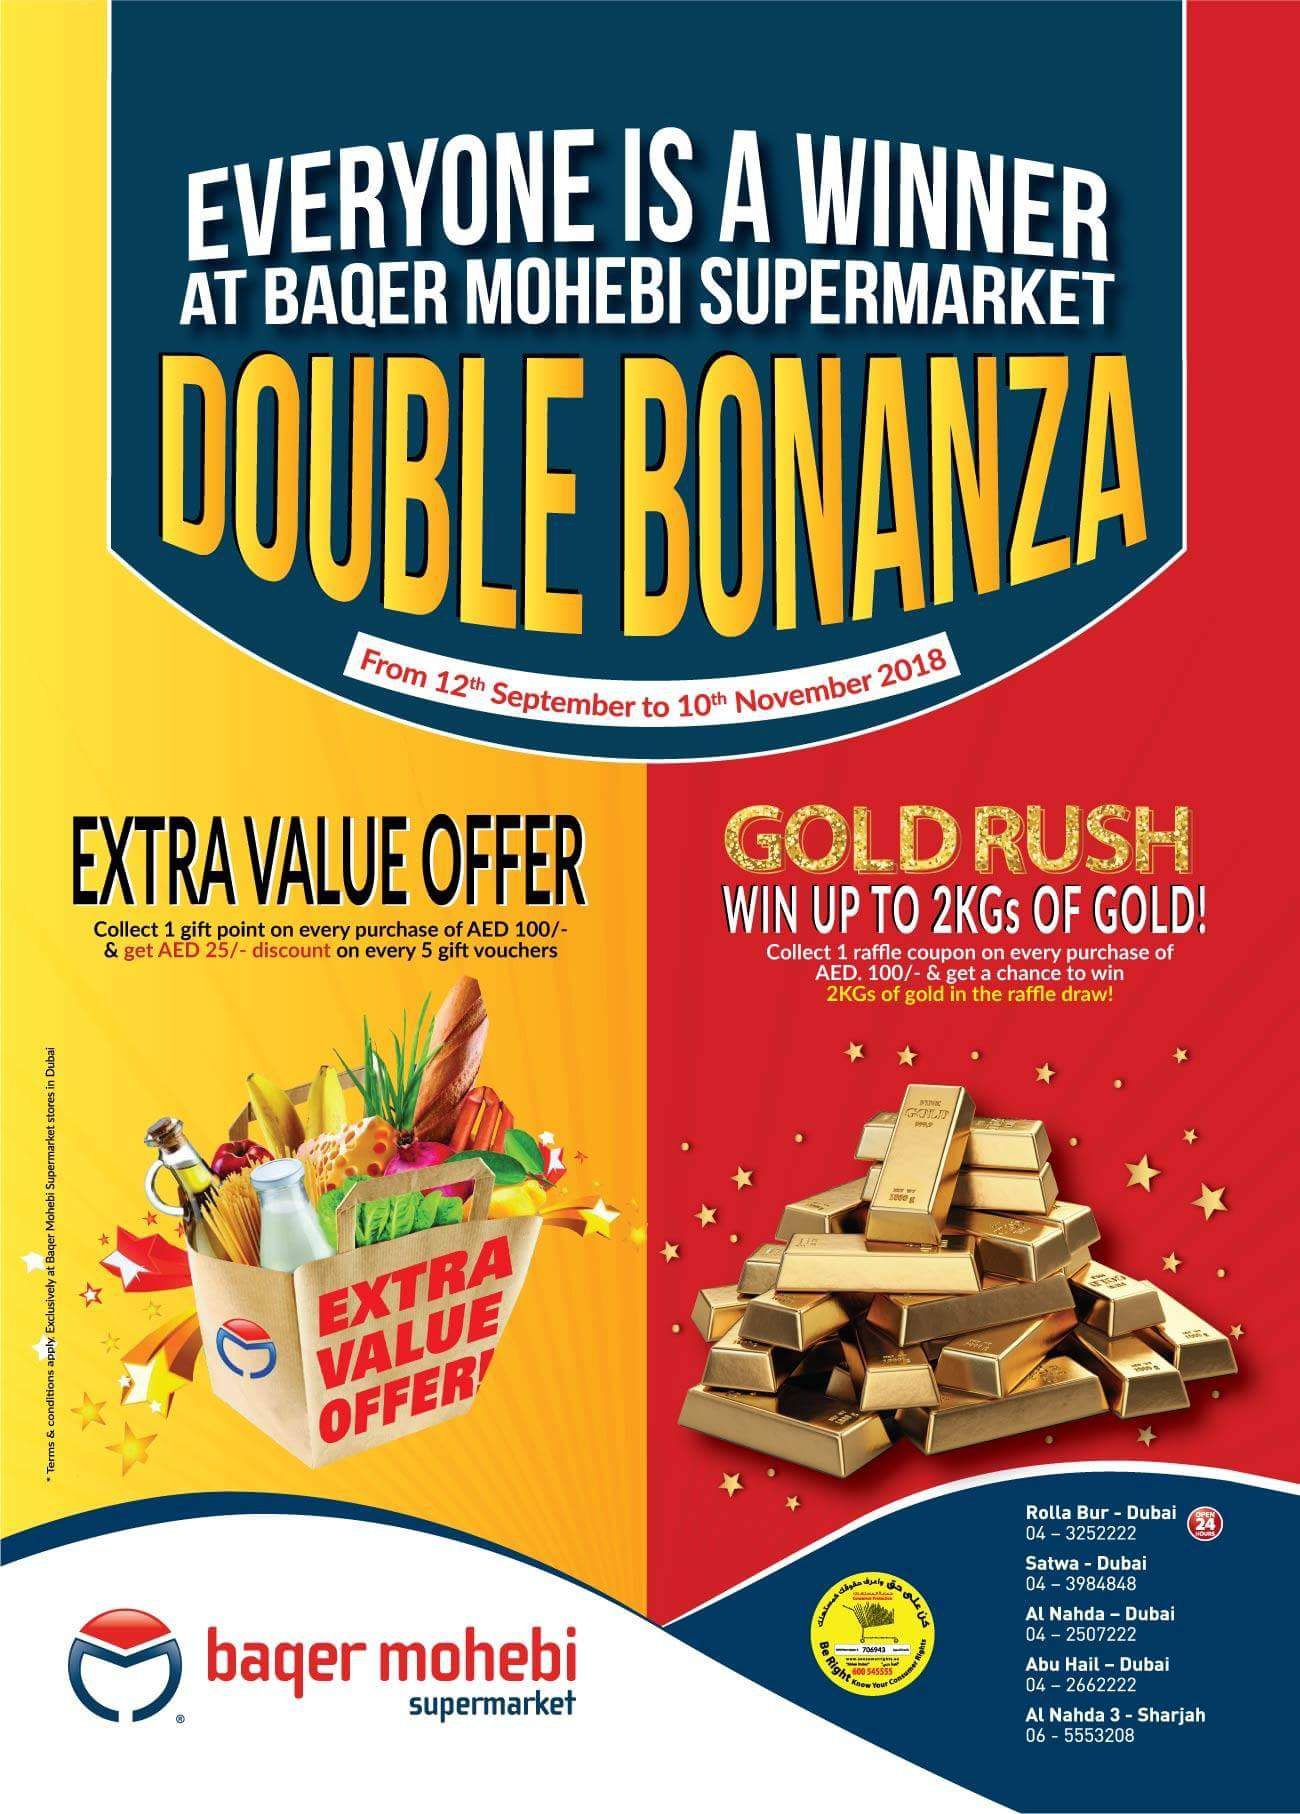 Win upto 2kgs of GOLD. Double Bonanza at Baqer Mohebi Supermarket  Extra Value Offer + Gold Rush